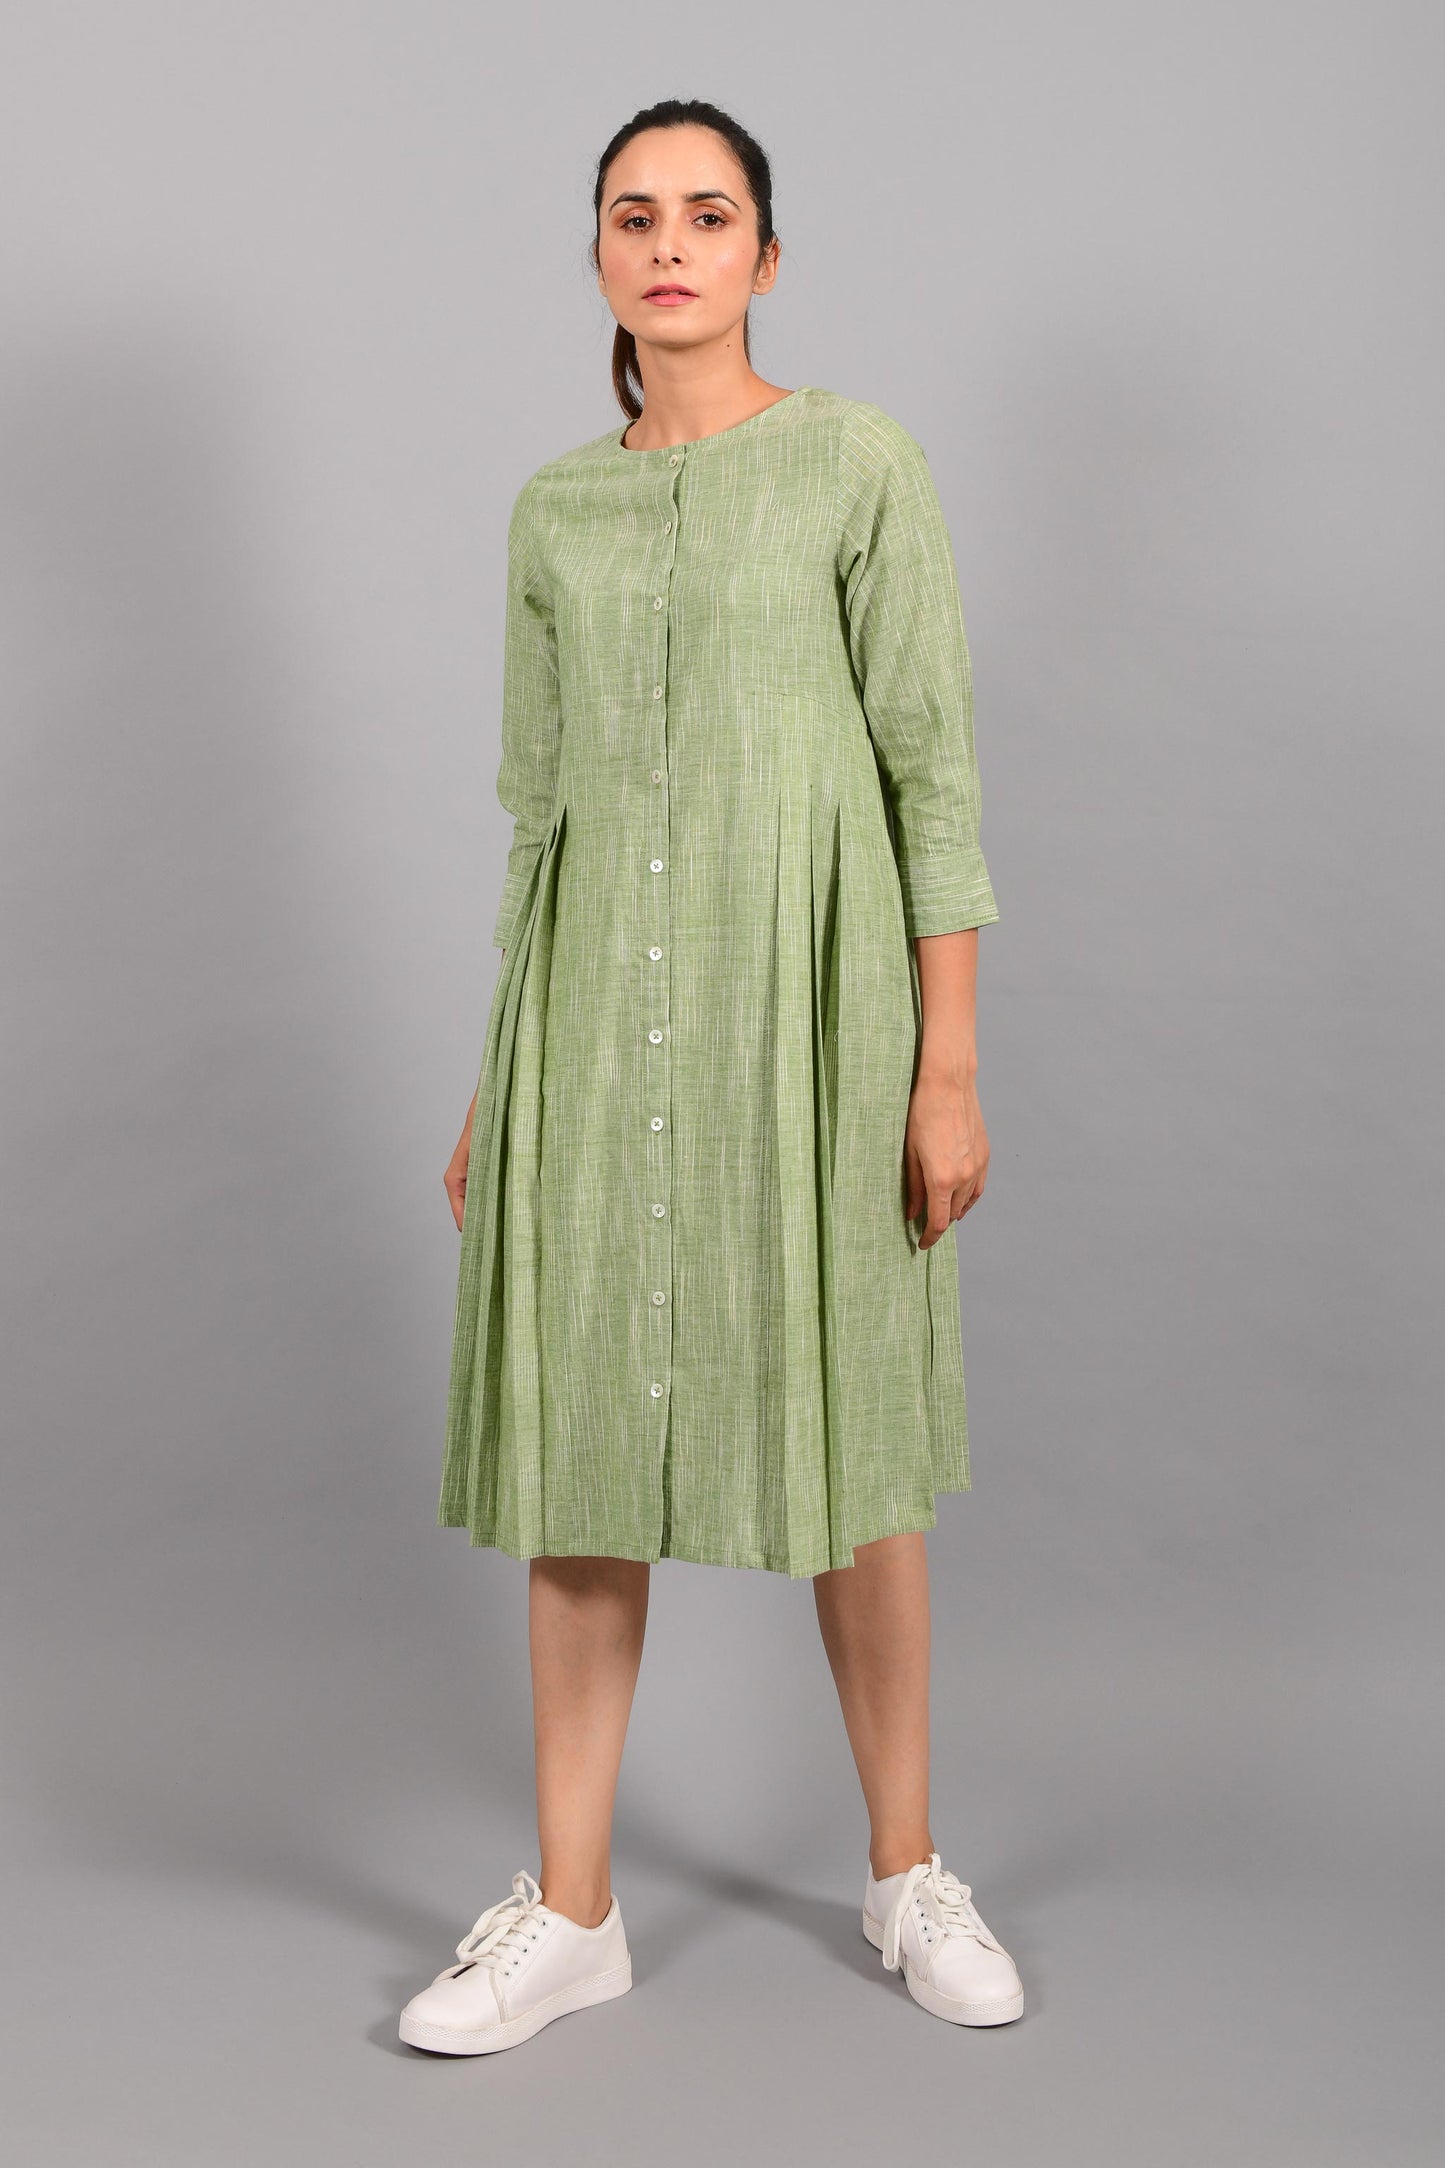 Front pose of an Indian female womenswear fashion model in a space dyed olive green handspun and handwoven khadi cotton pleated dress-kurta by Cotton Rack.